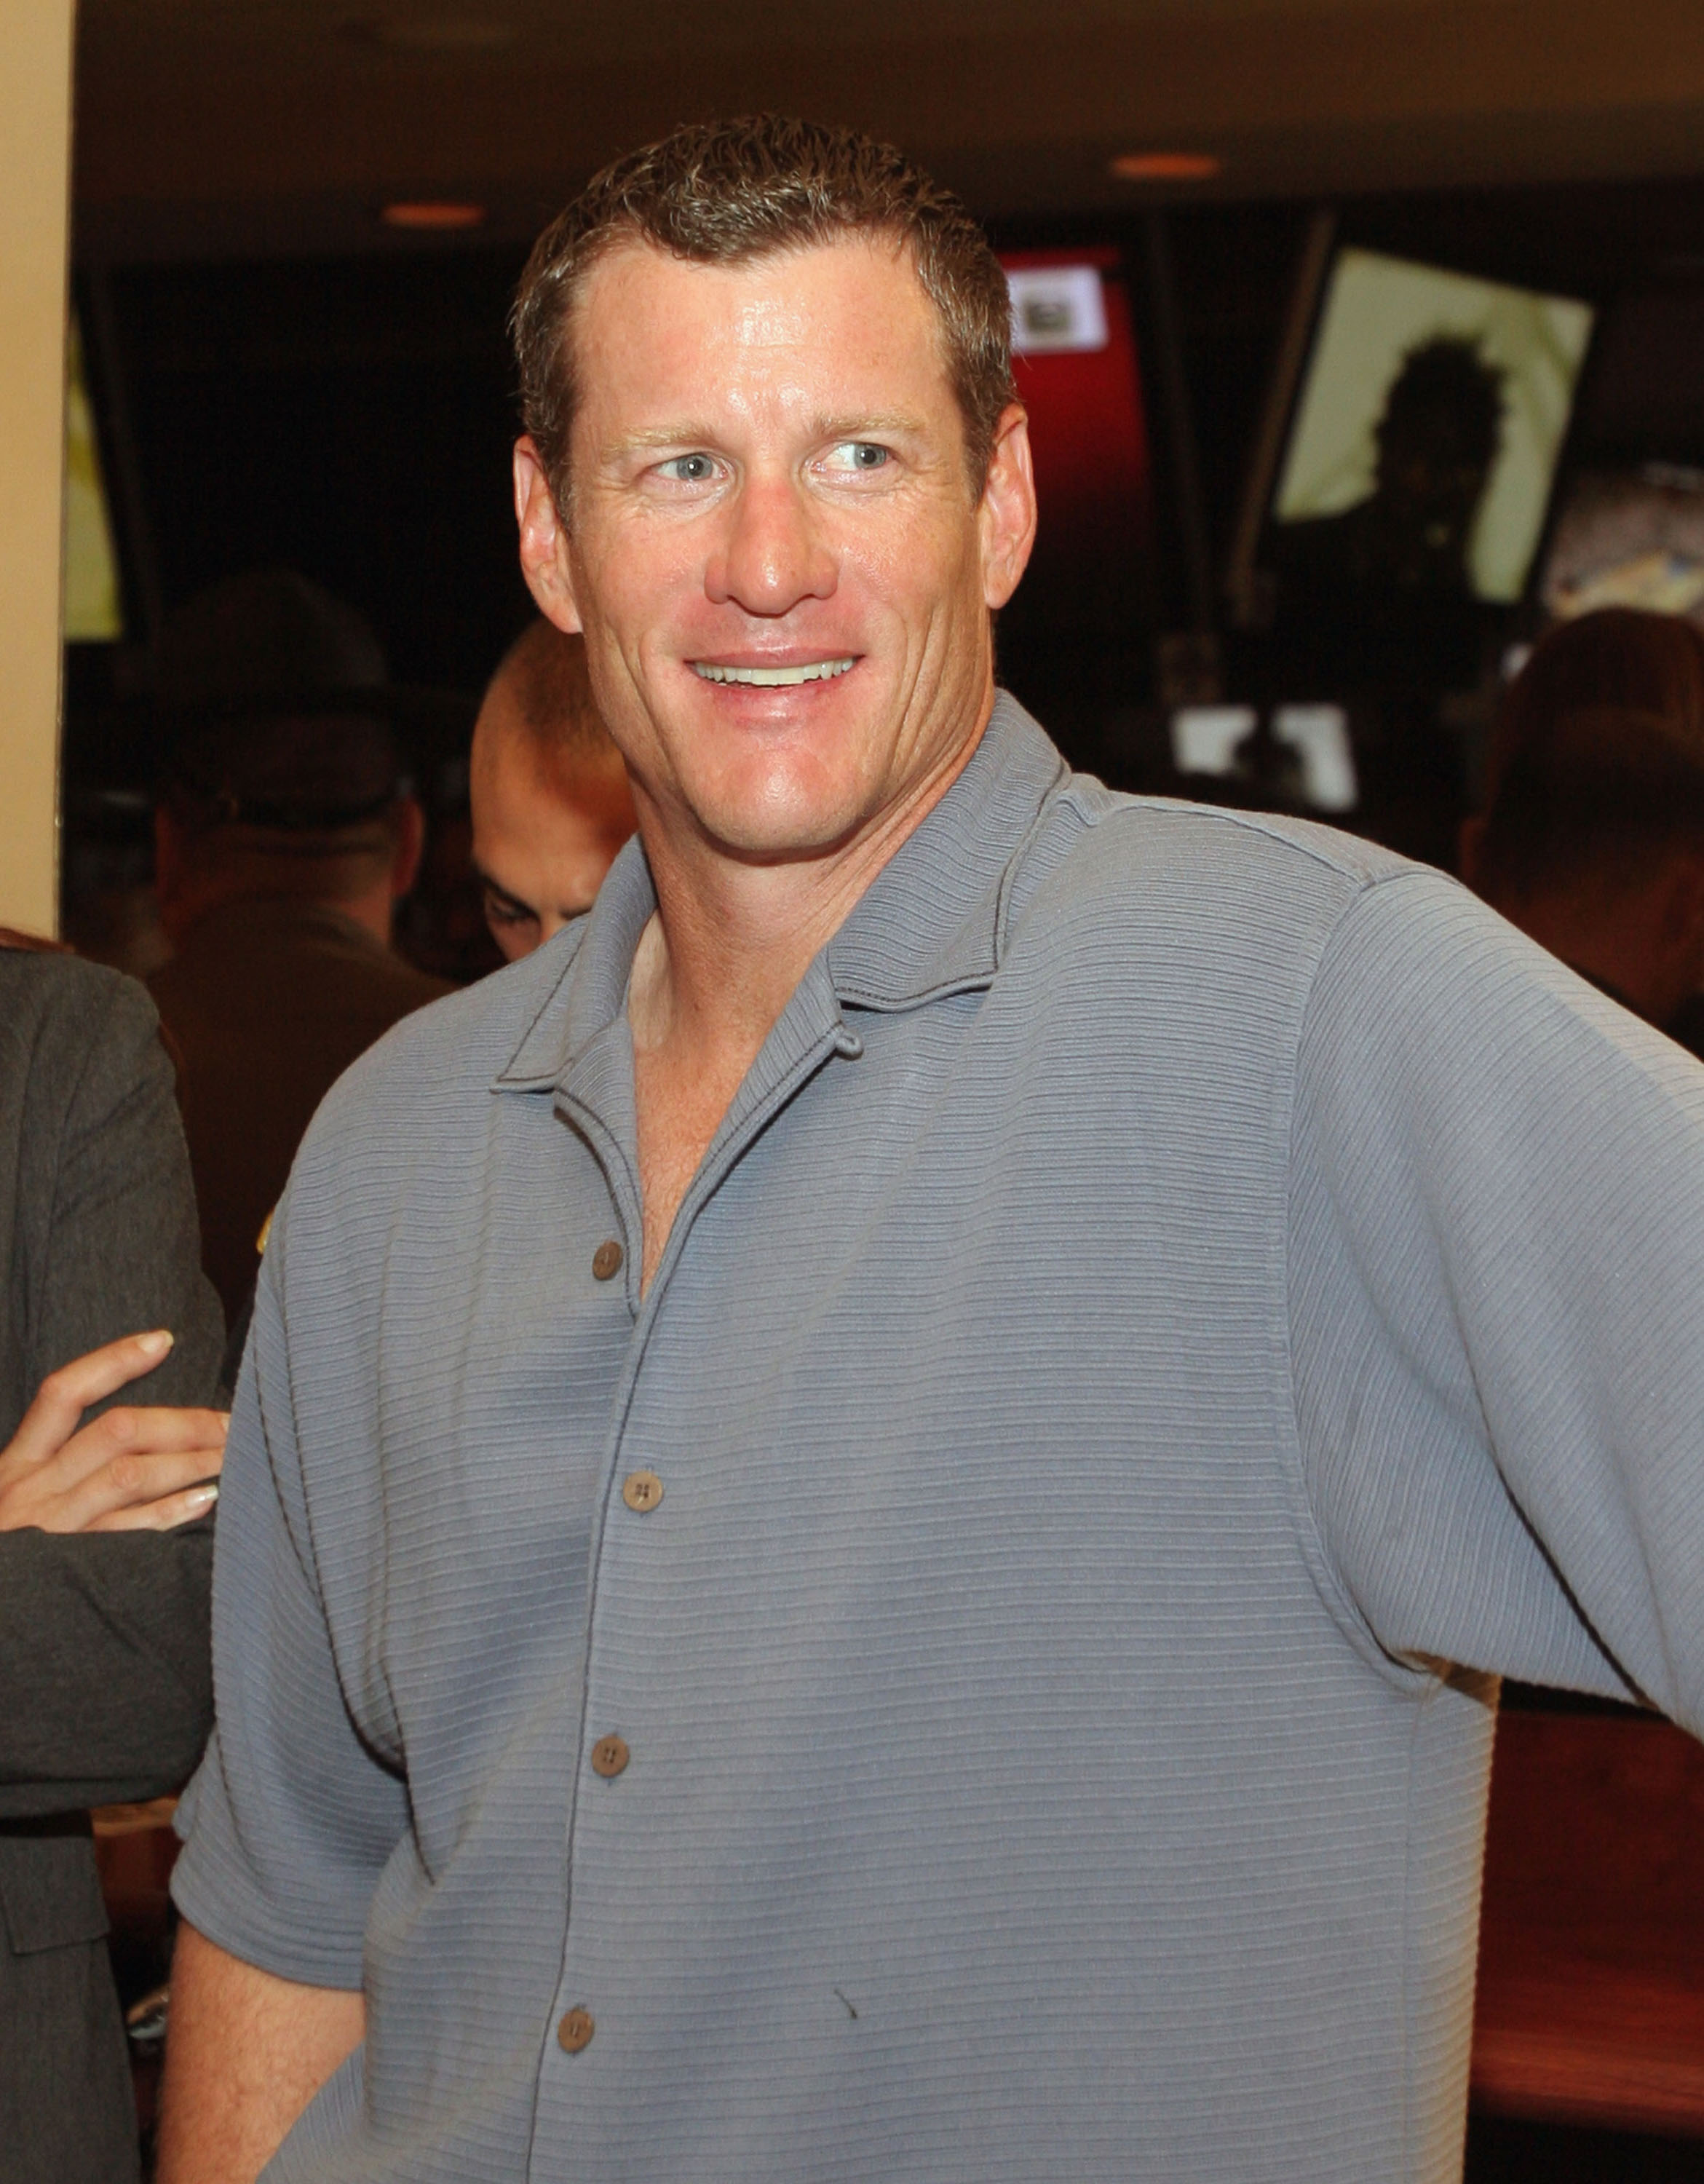 Florida Marlin Baseball player Jeff Conine attends the Jeff Conine All Star Welcome to Ford Championship Weekend at Conine’s Clubhouse Grill on November 15, 2005 in Hollywood, Florida.